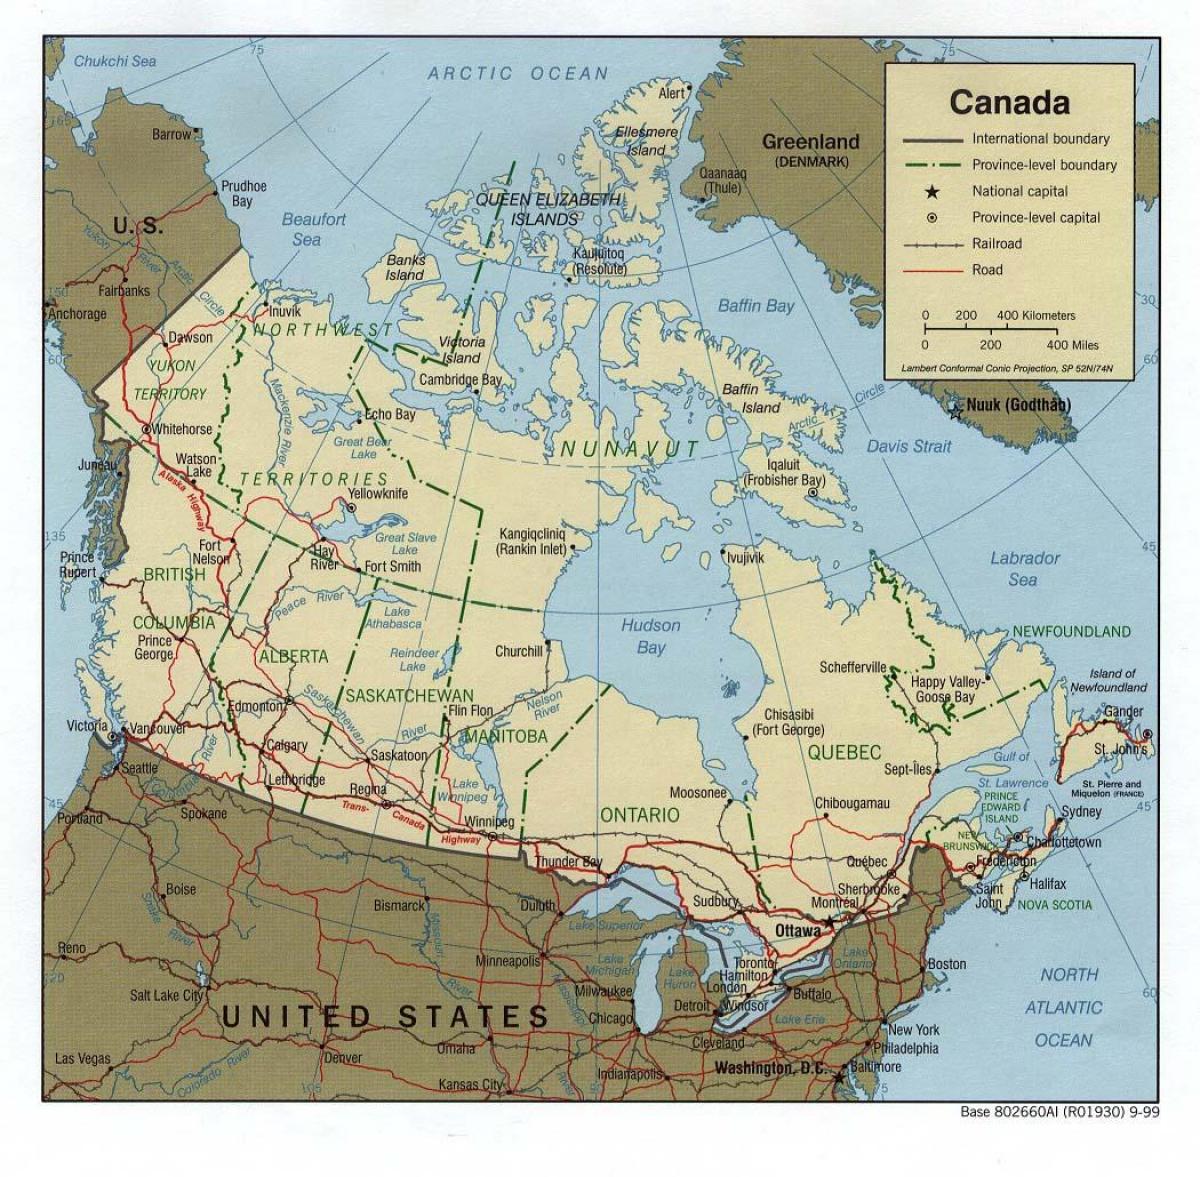 trans Canada highway map